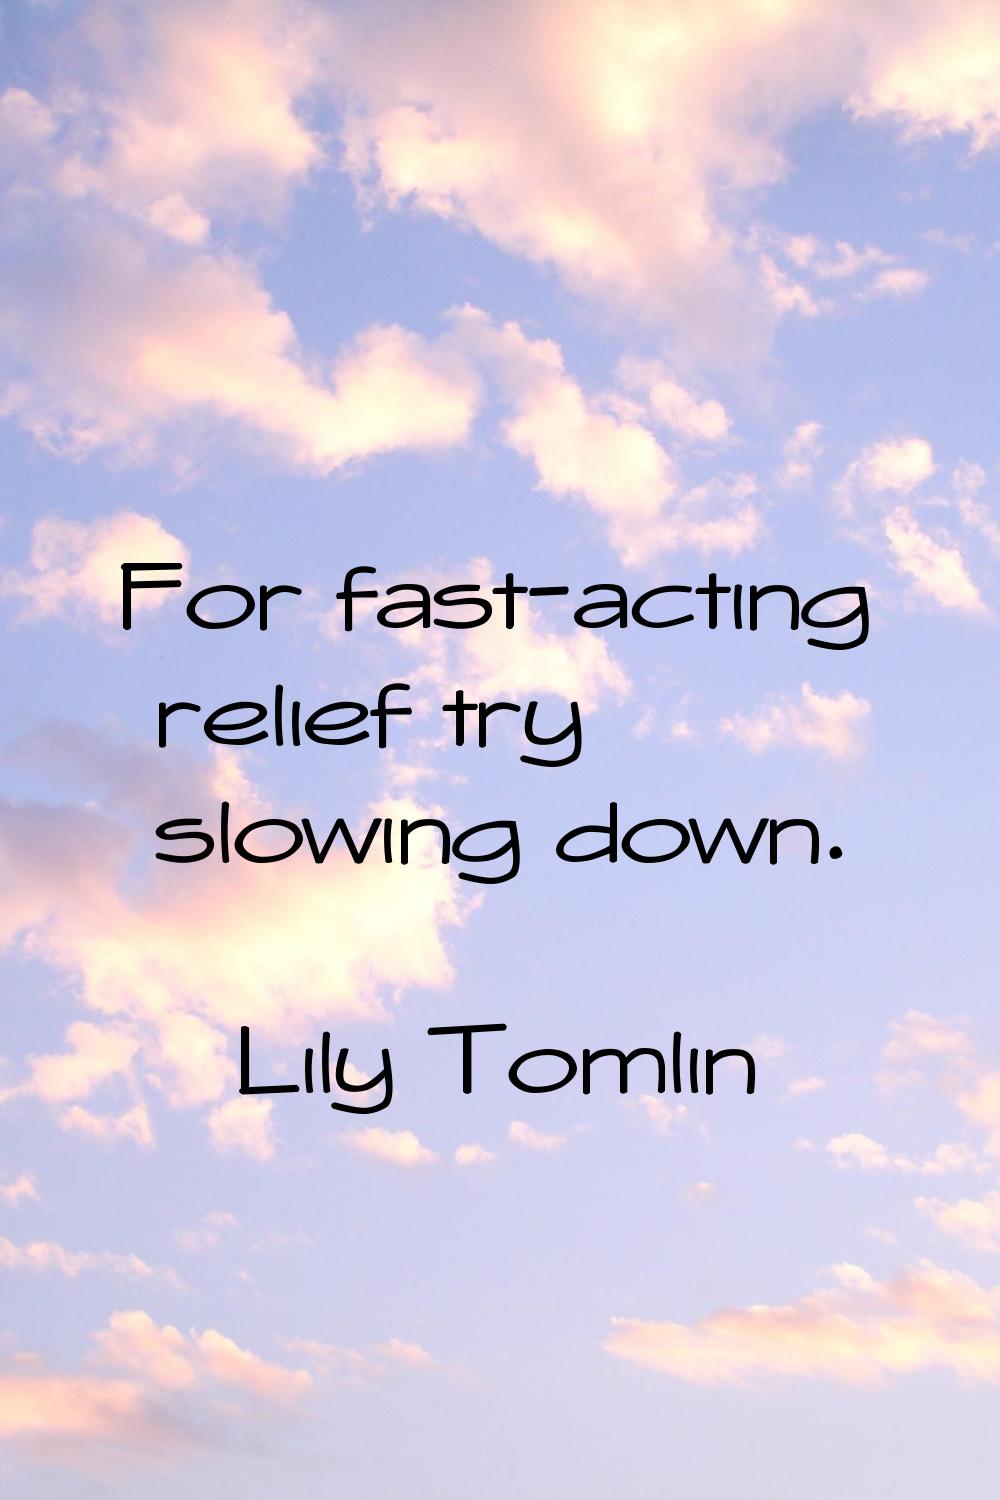 For fast-acting relief try slowing down.